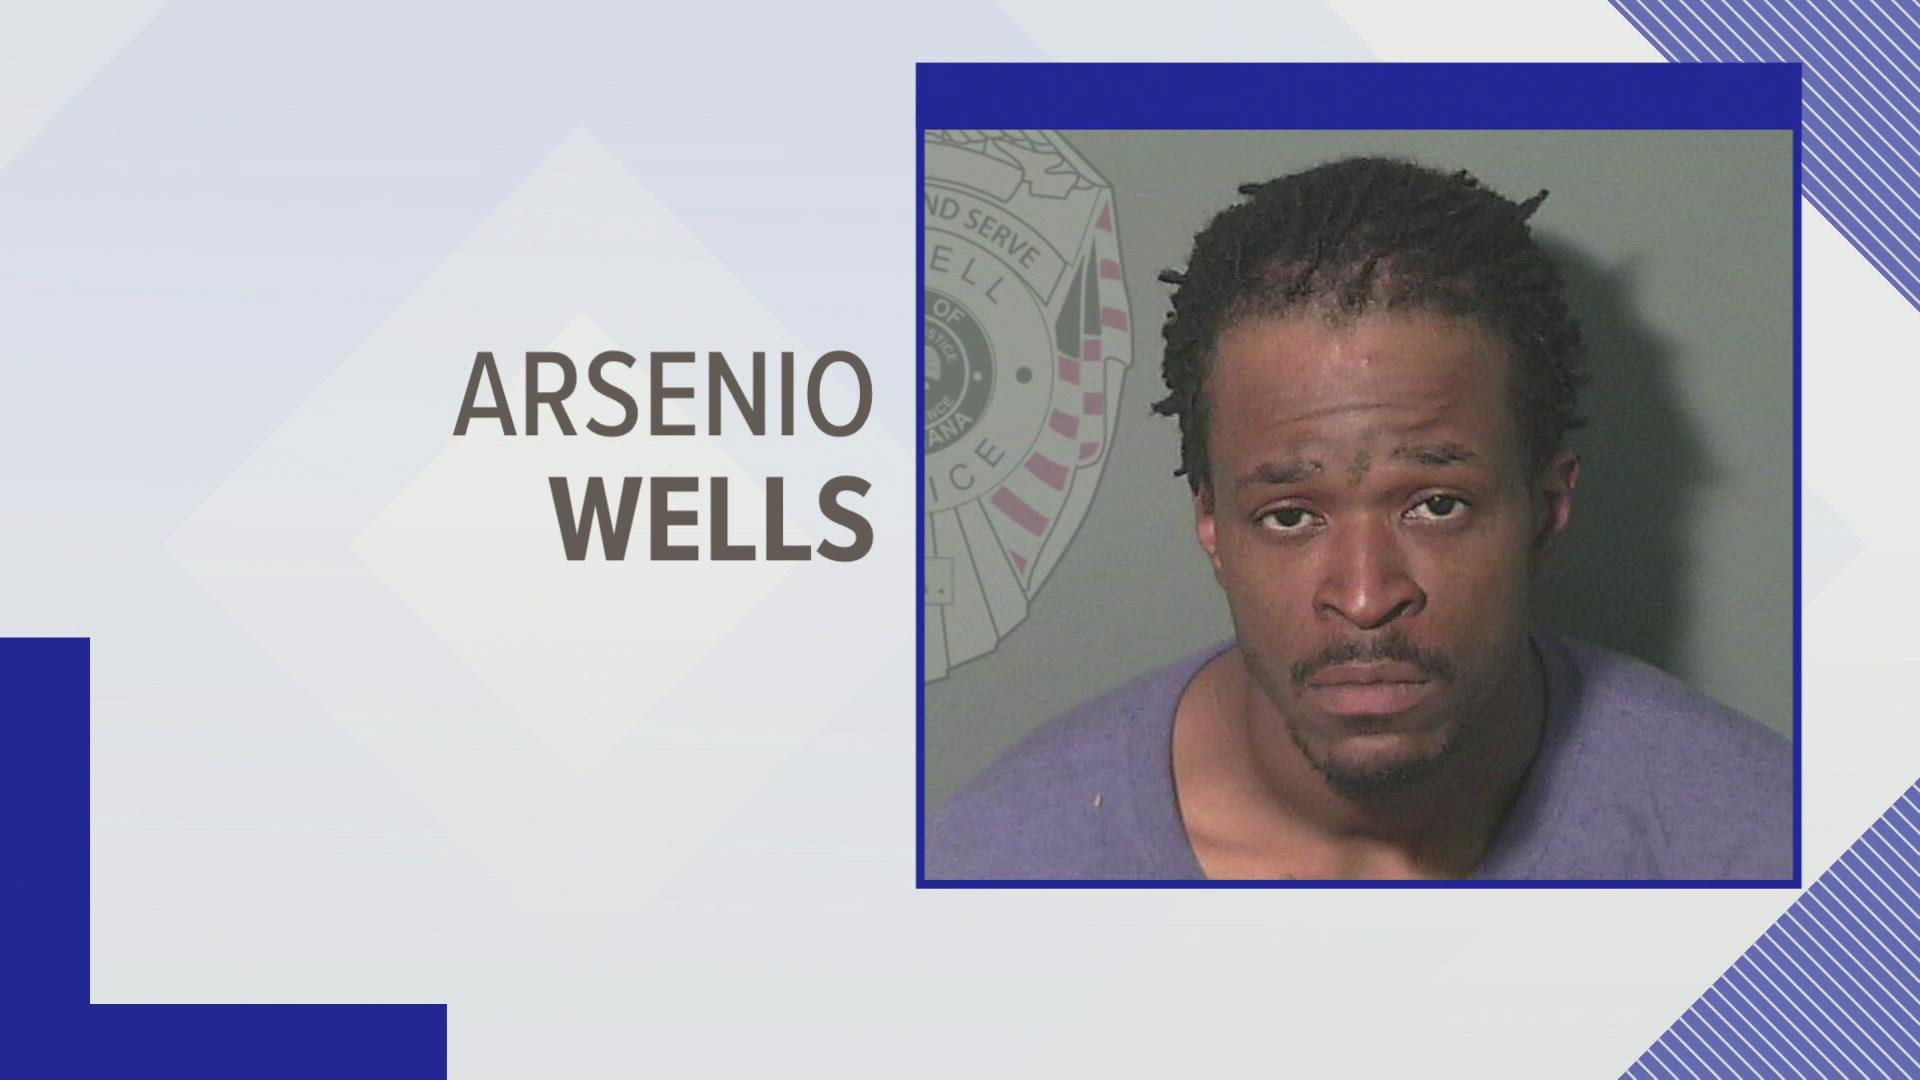 A New Orleans man was arrested after carjacking a vehicle in Slidell that had no gas in it. When police caught him at a gas station he drove off but crashed.